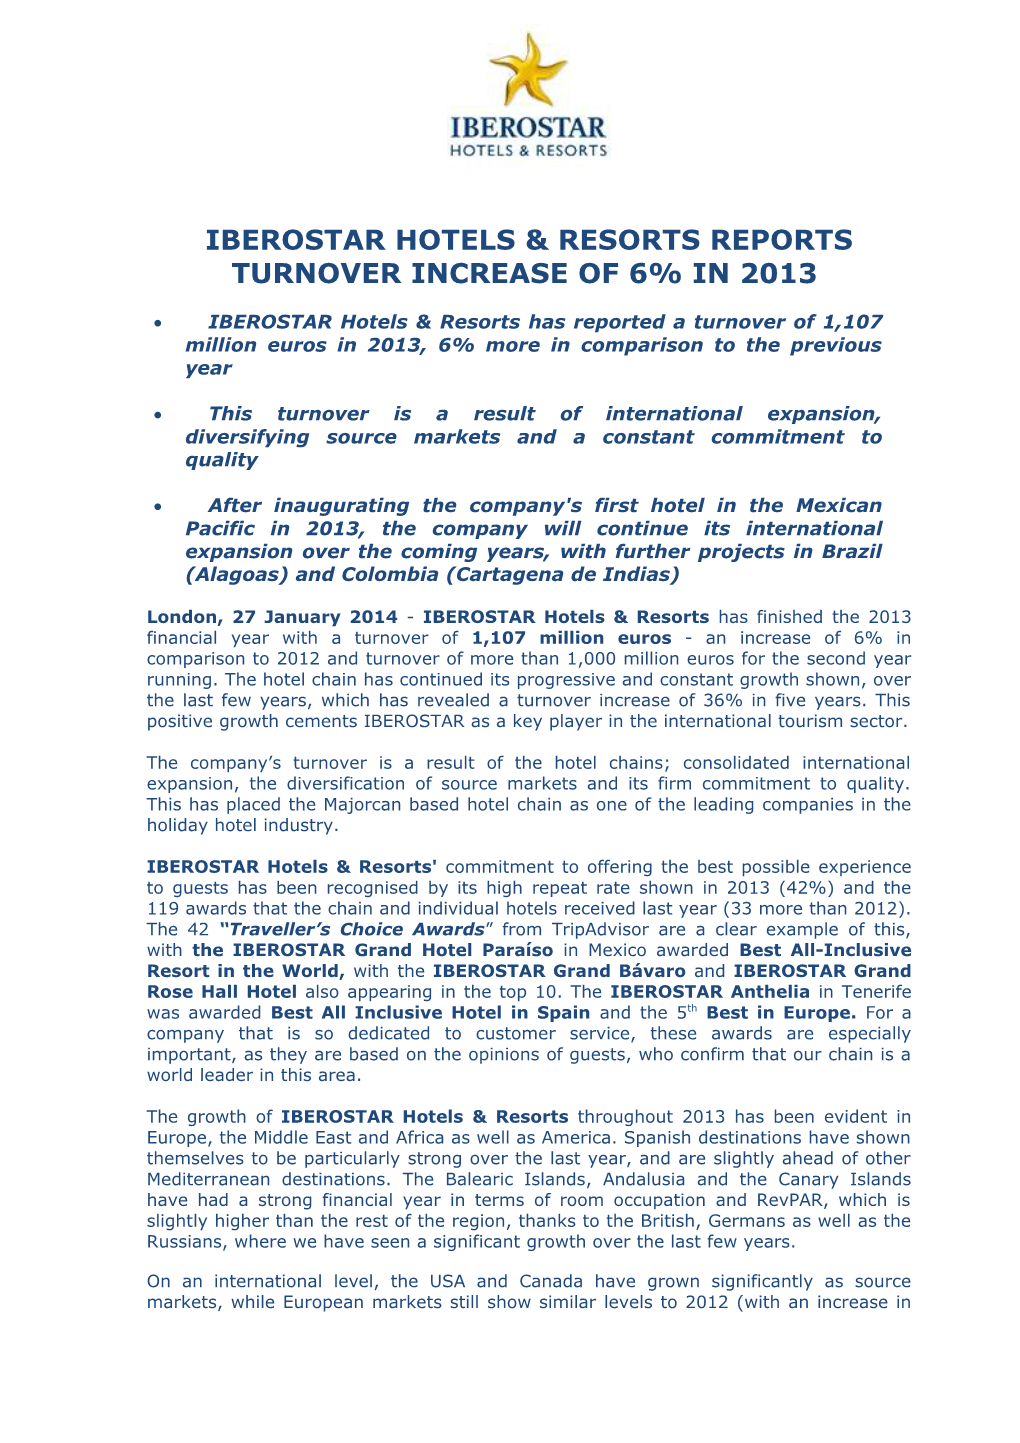 Iberostar Hotels & Resorts Reports Turnover Increase of 6% in 2013